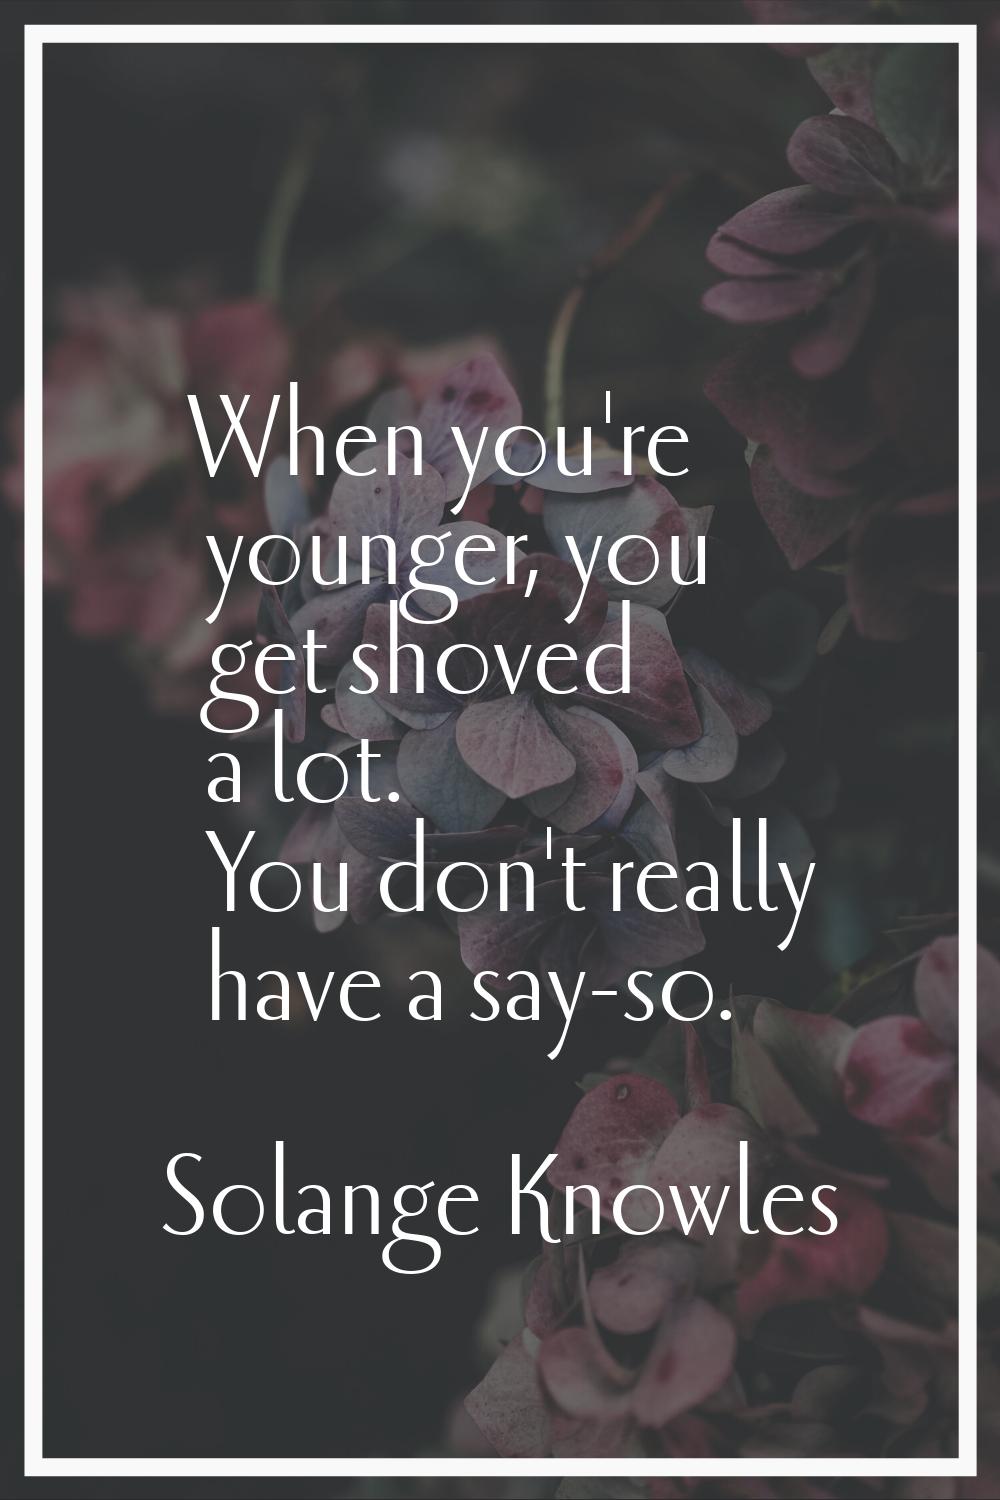 When you're younger, you get shoved a lot. You don't really have a say-so.